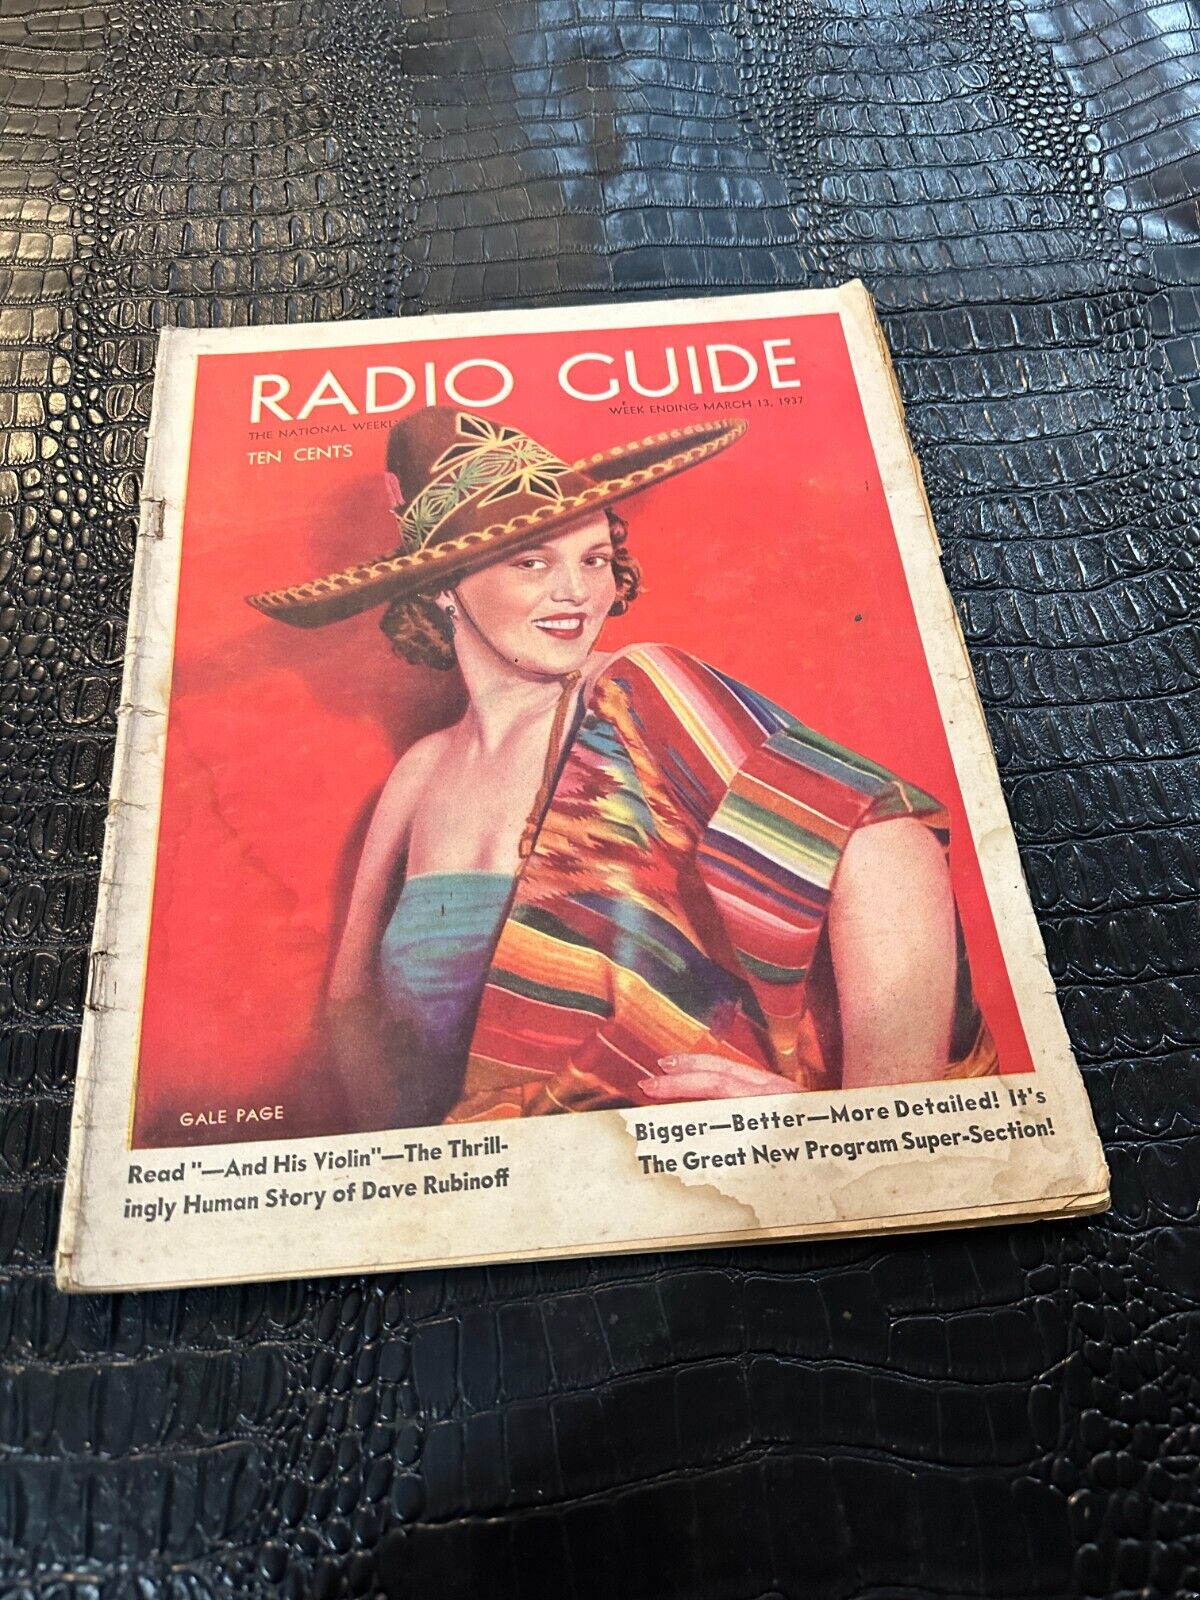 MARCH 13  1937 RADIO GUIDE vintage magazine - Gale Page